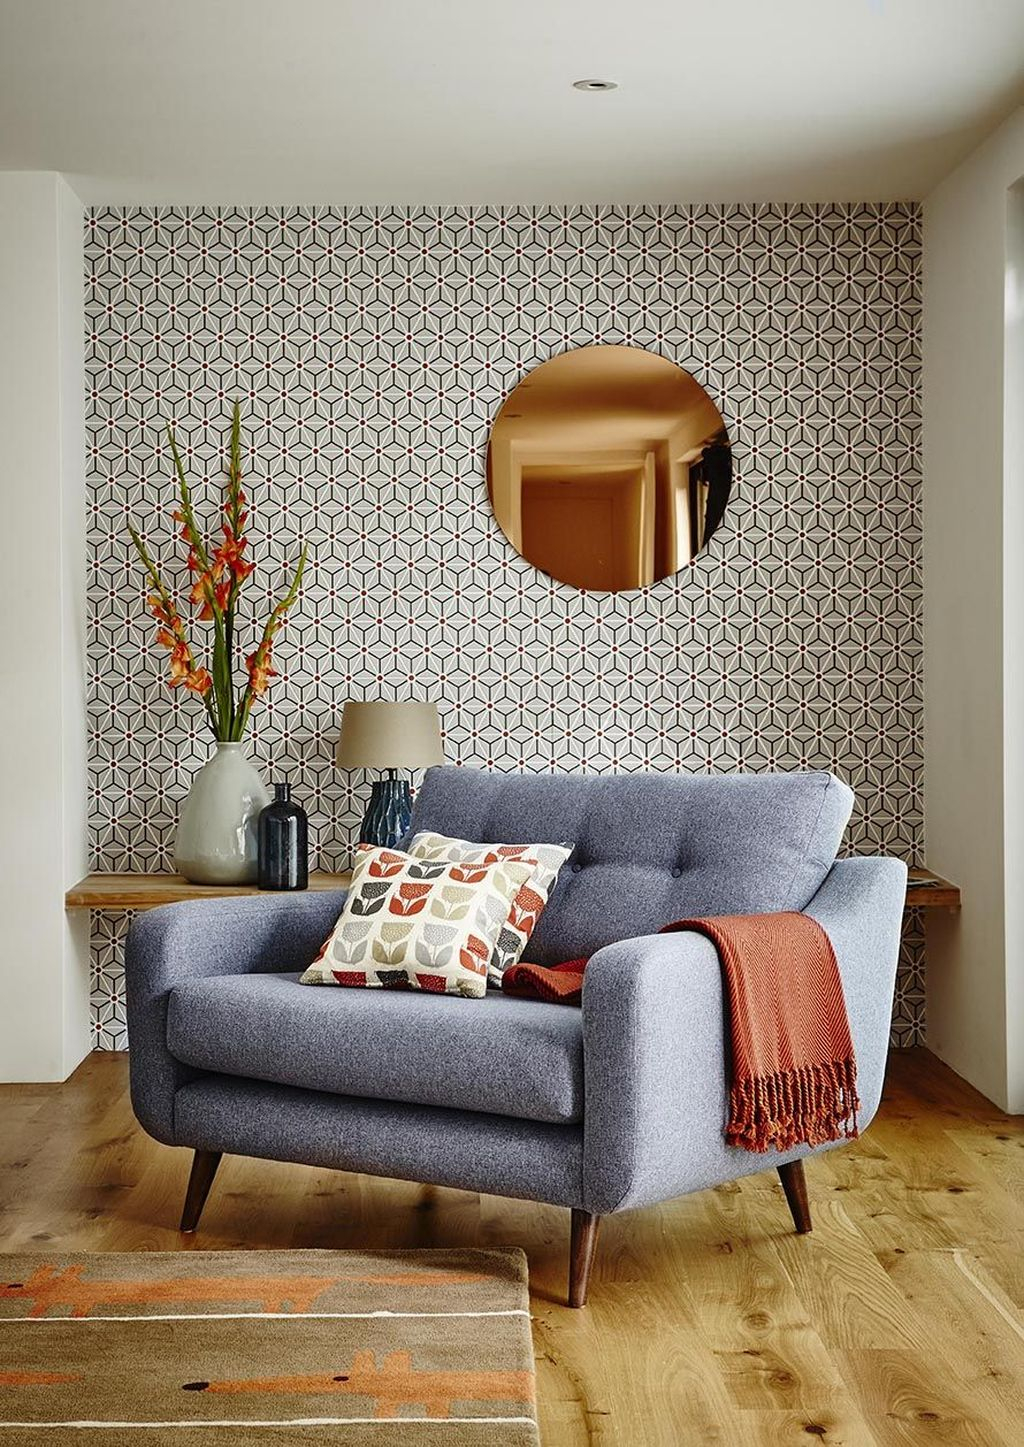 45 The Best Interior Design Using Wallpaper To Add To The Beauty Of